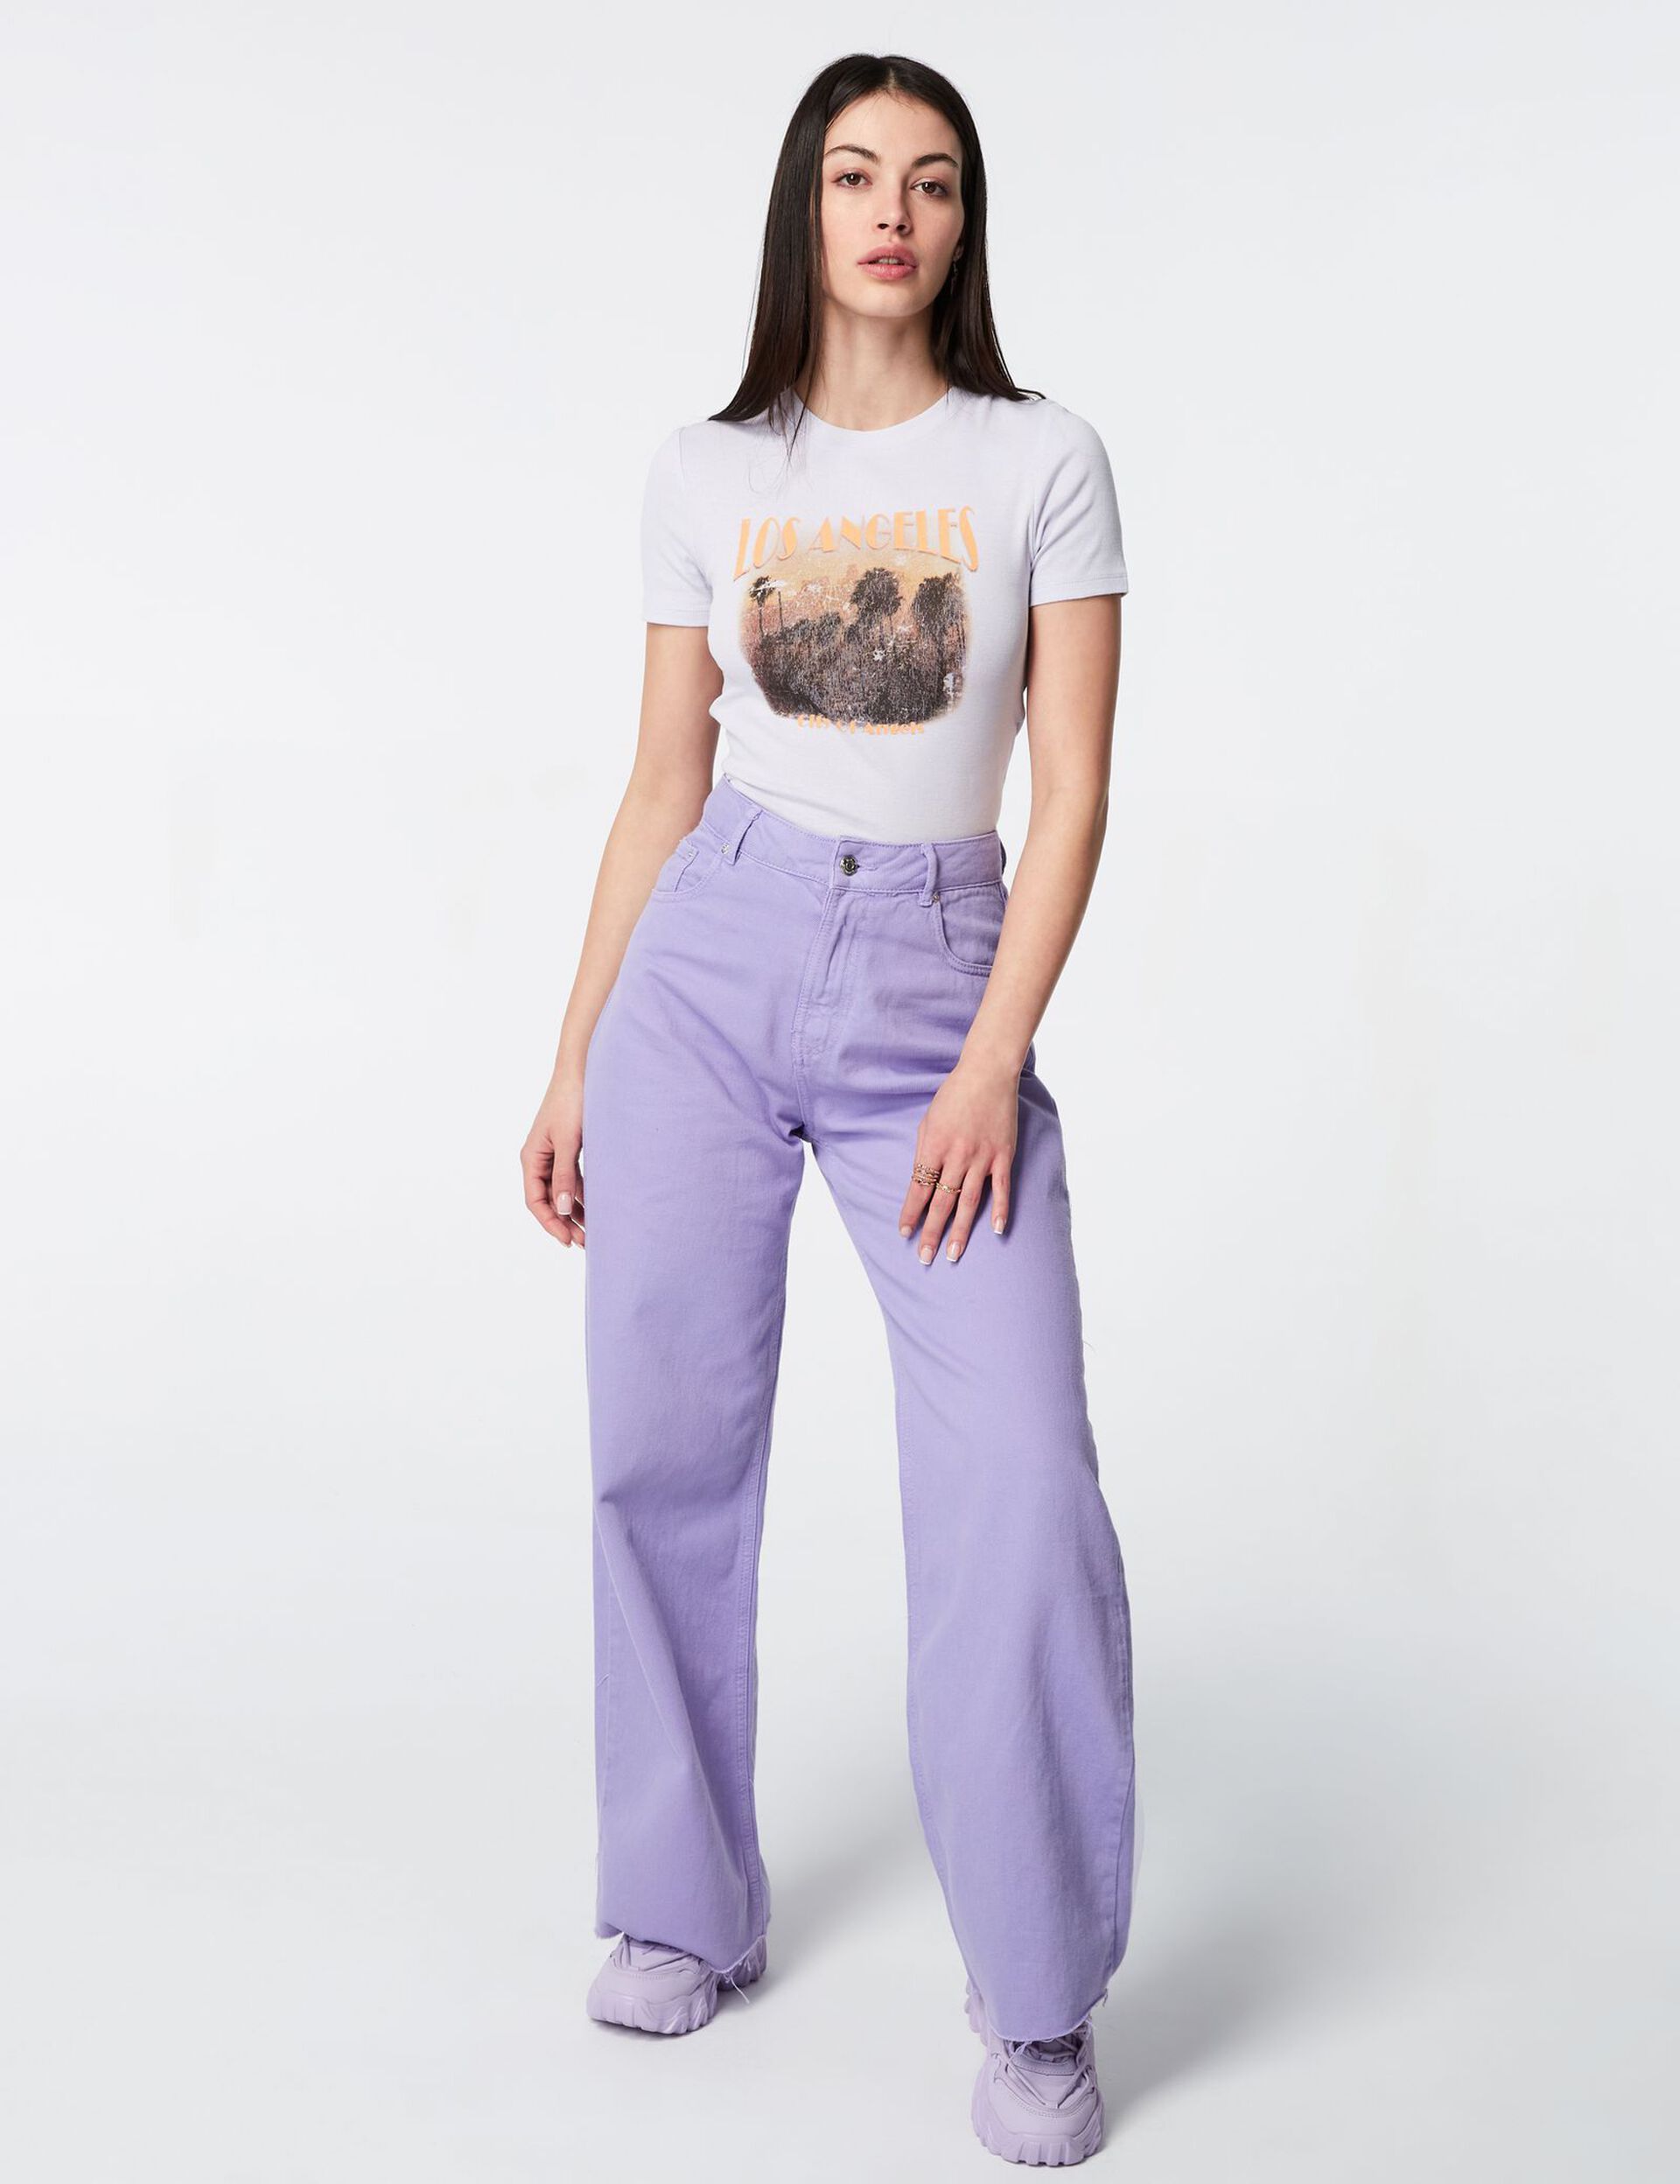 Los Angeles cropped T-shirt